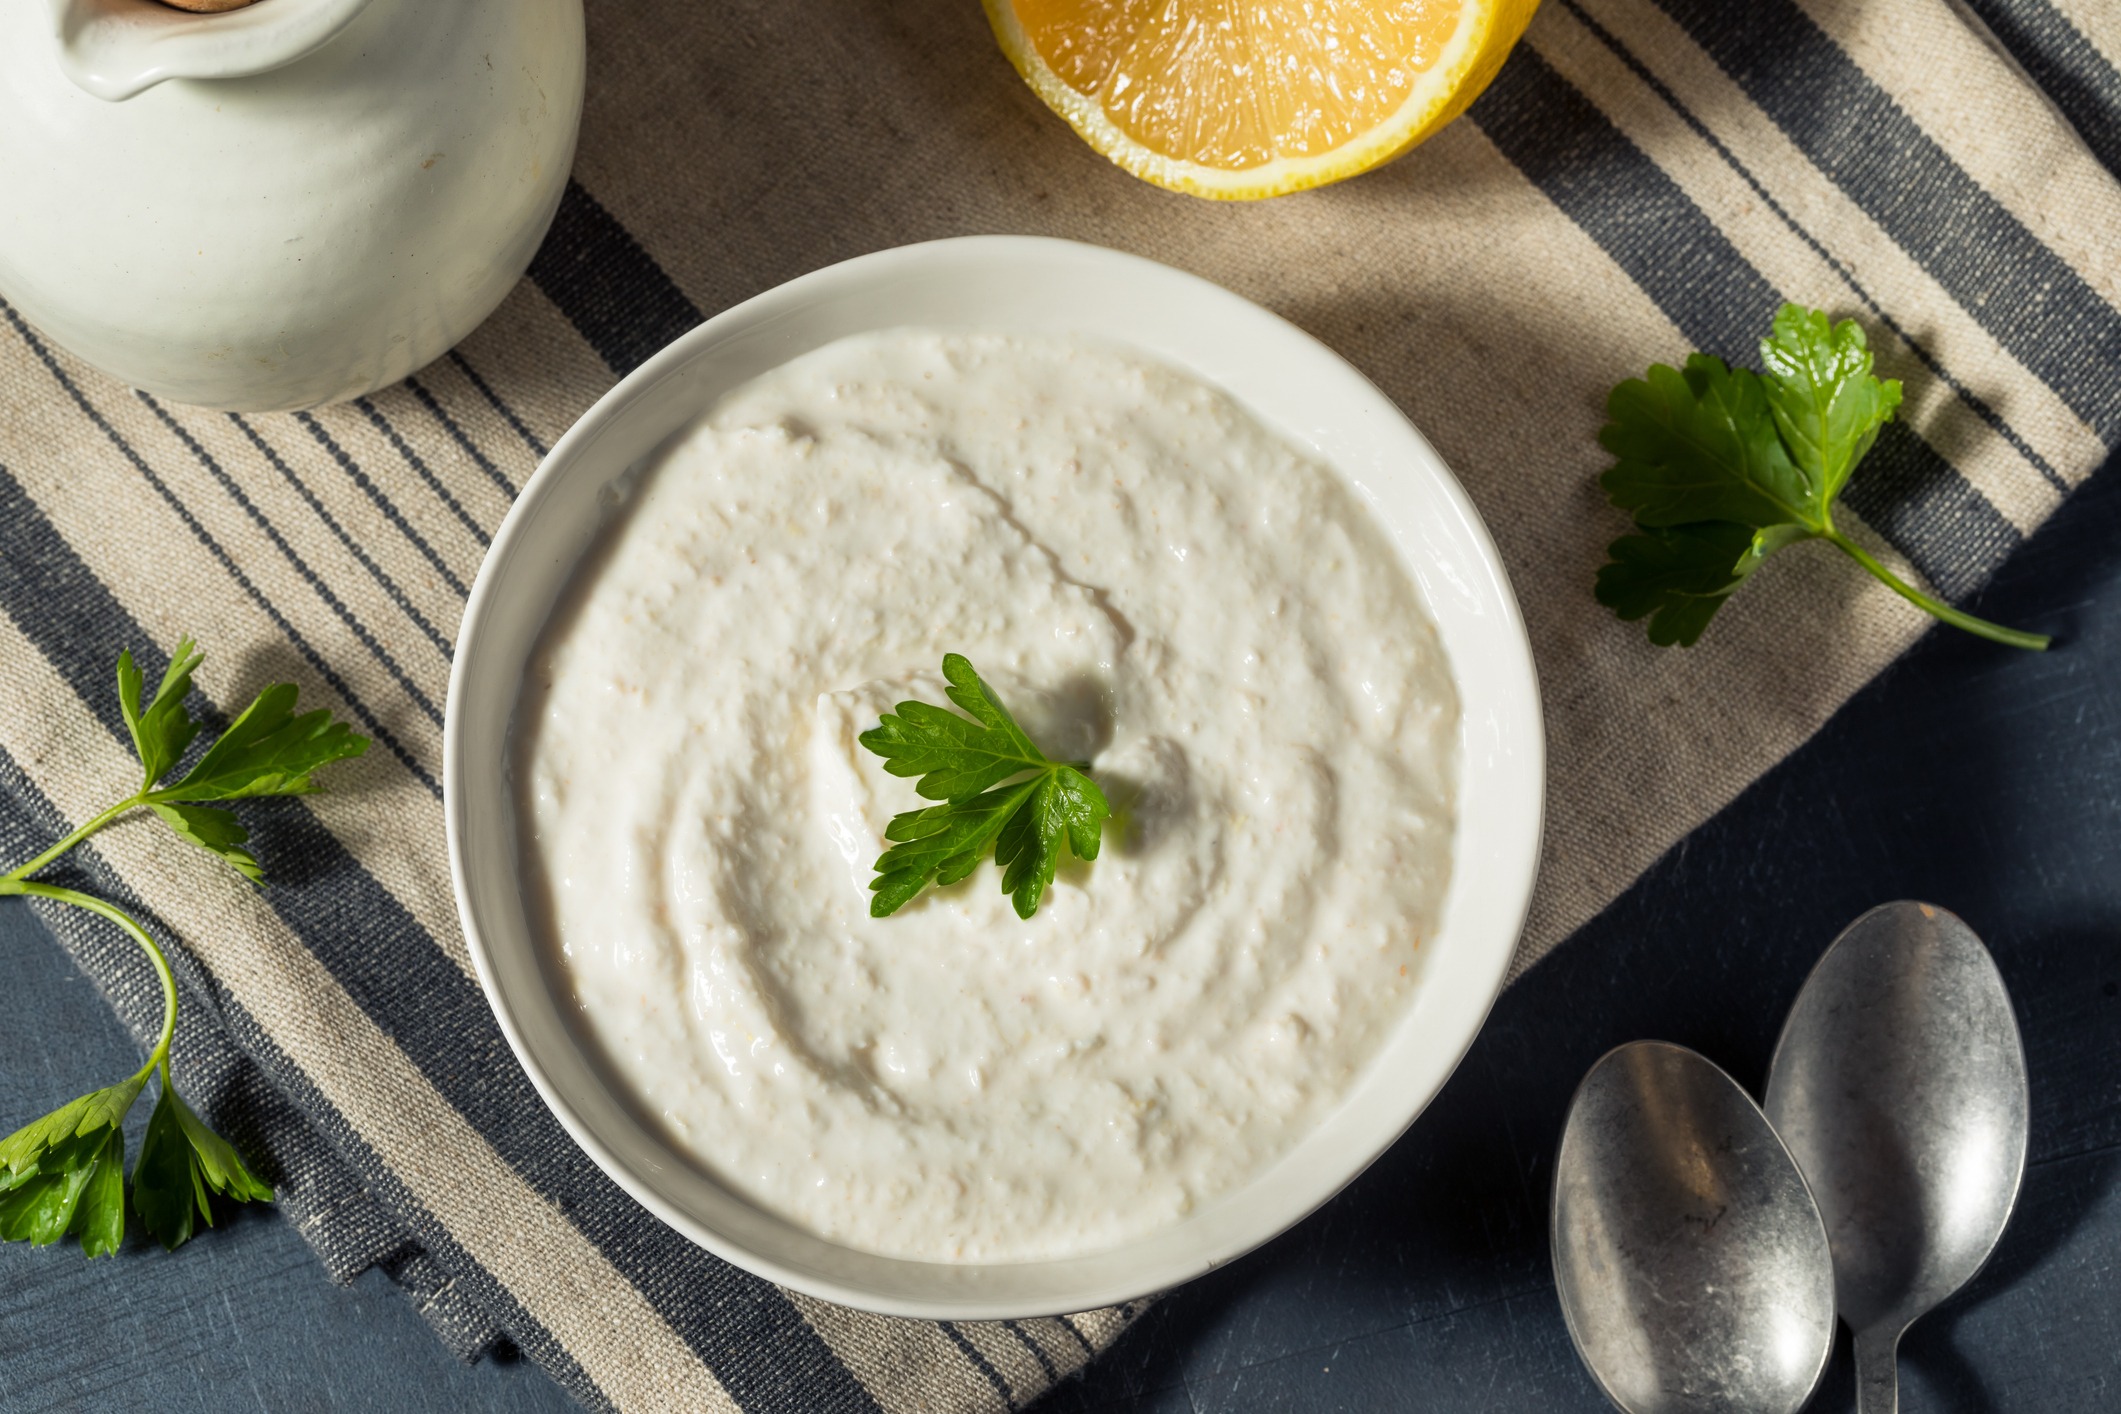 Horseradish Cream Sauce in a white bowl. Sitting on a striped white and black tablecloth, with parsley and lemon garnish to the side.